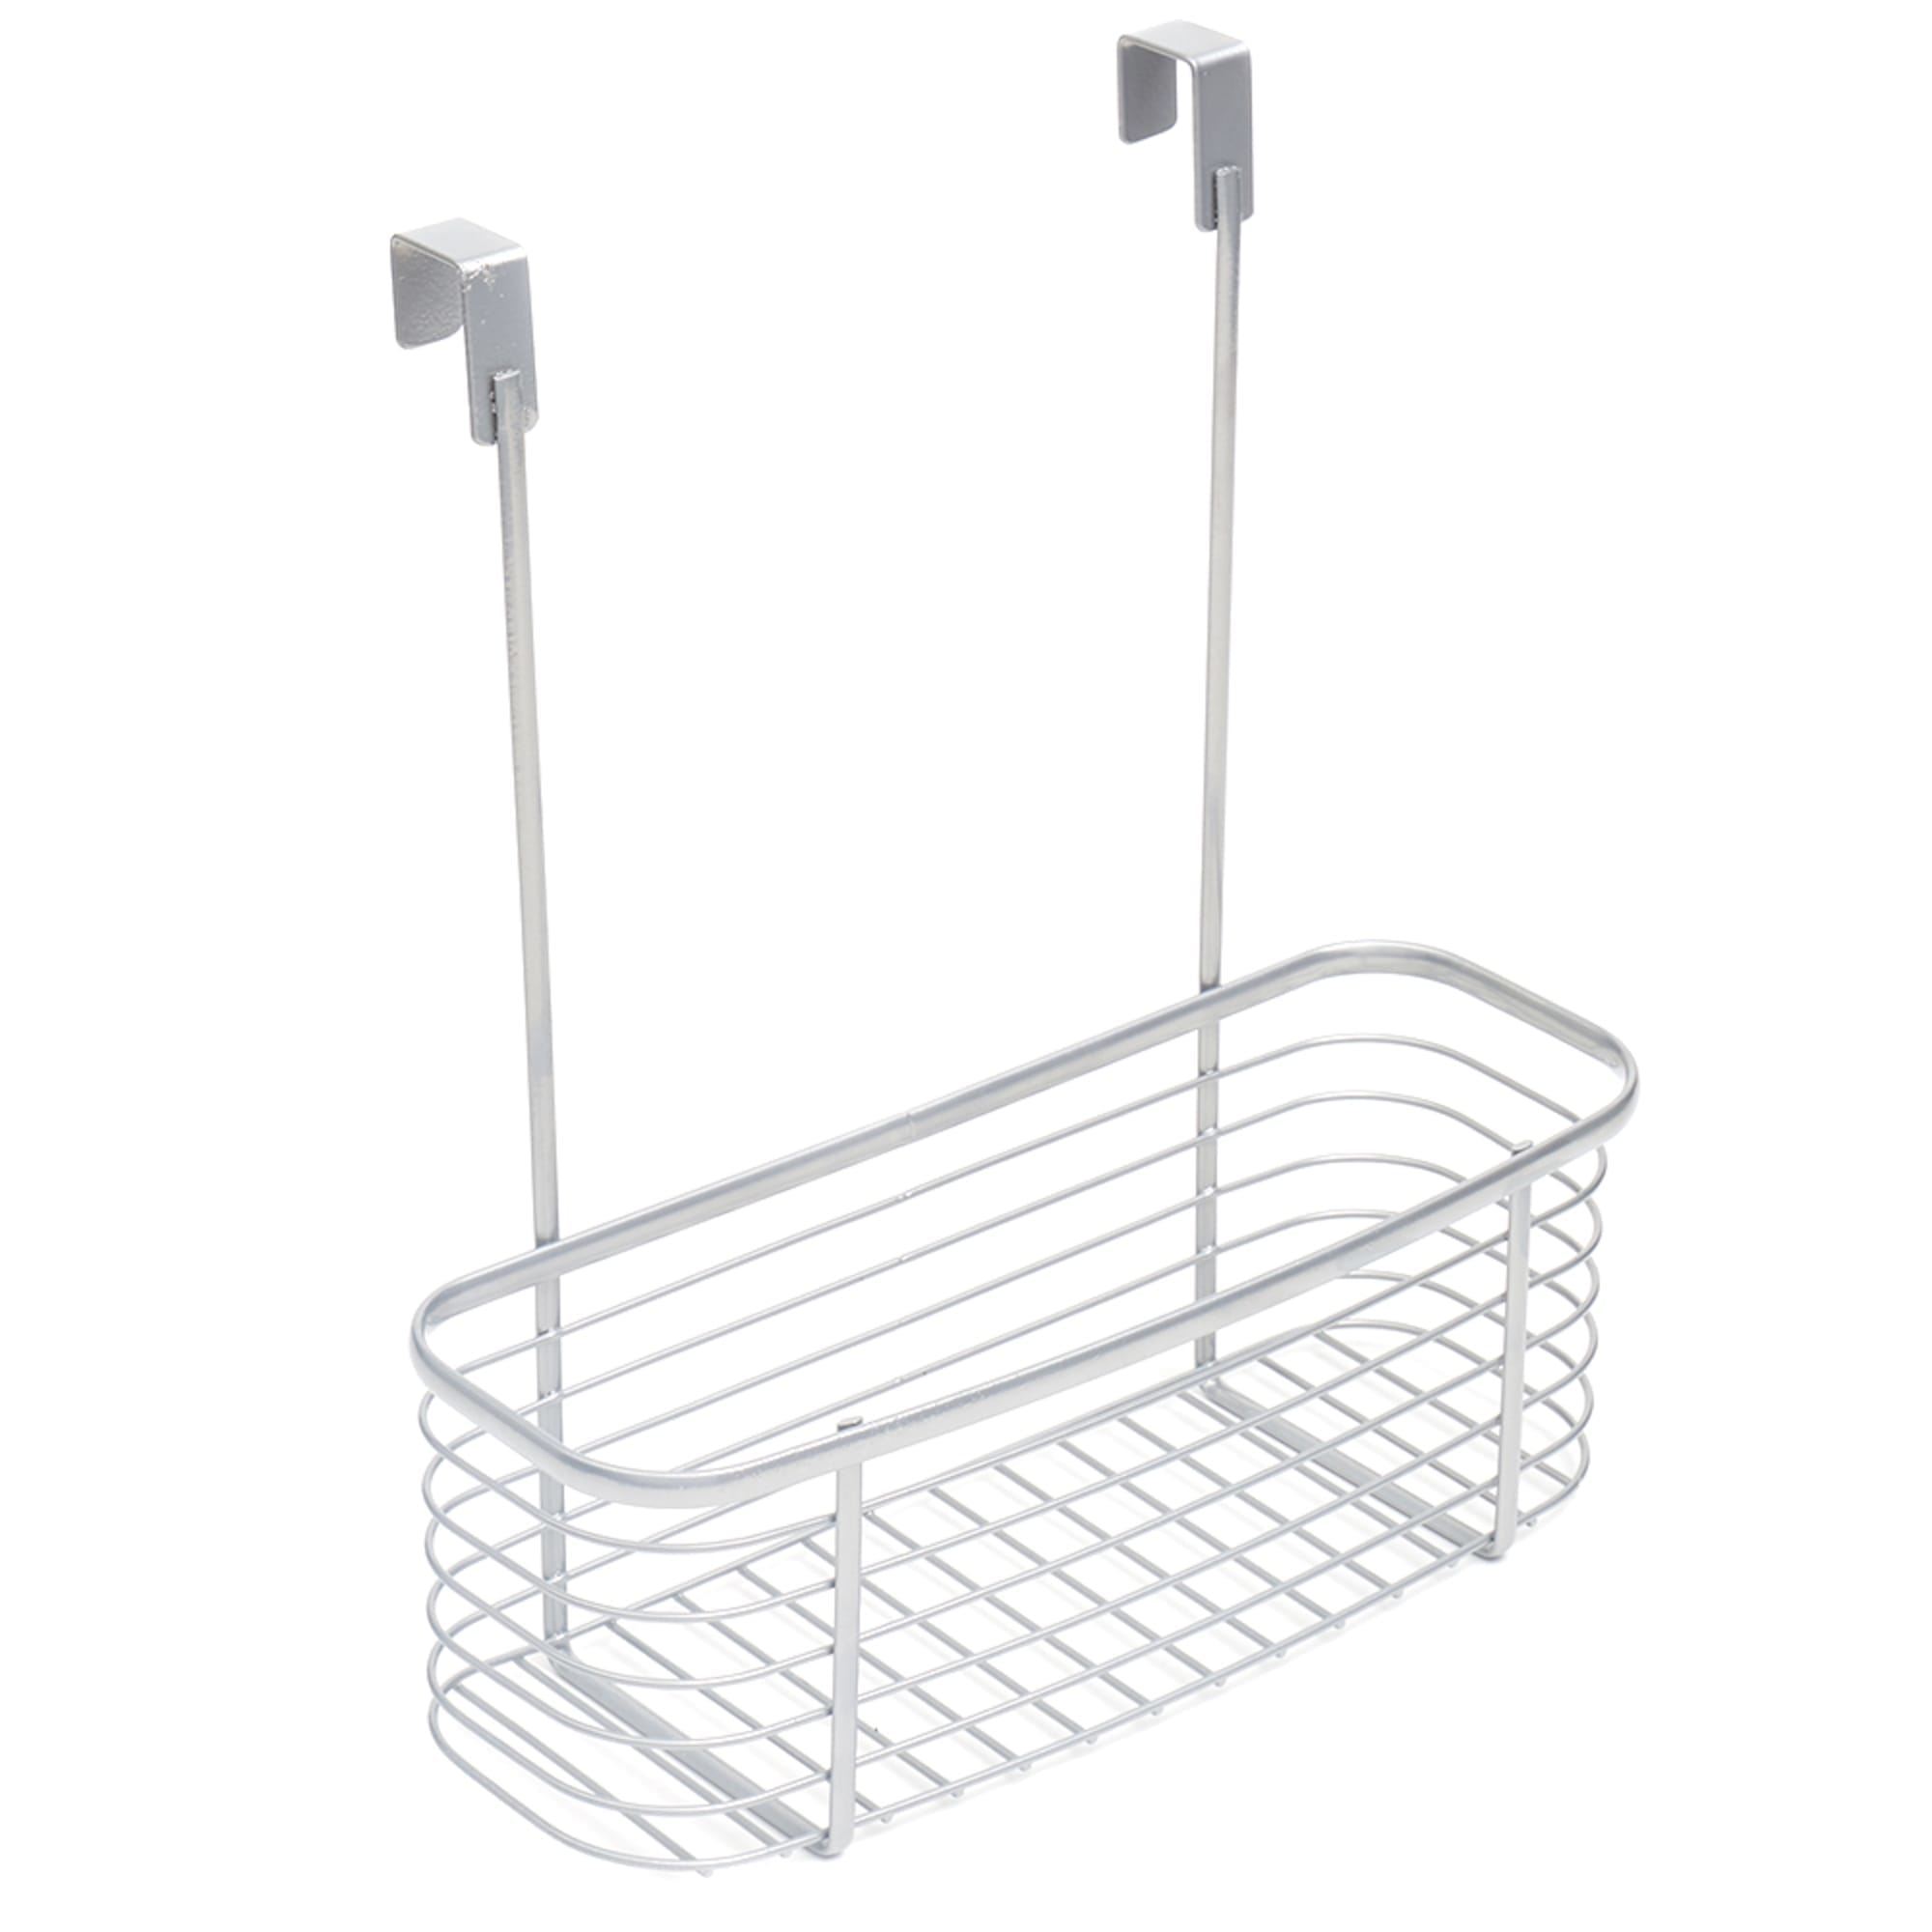 Home Basics Delta Steel Over the Cabinet Basket, Silver $6.00 EACH, CASE PACK OF 12